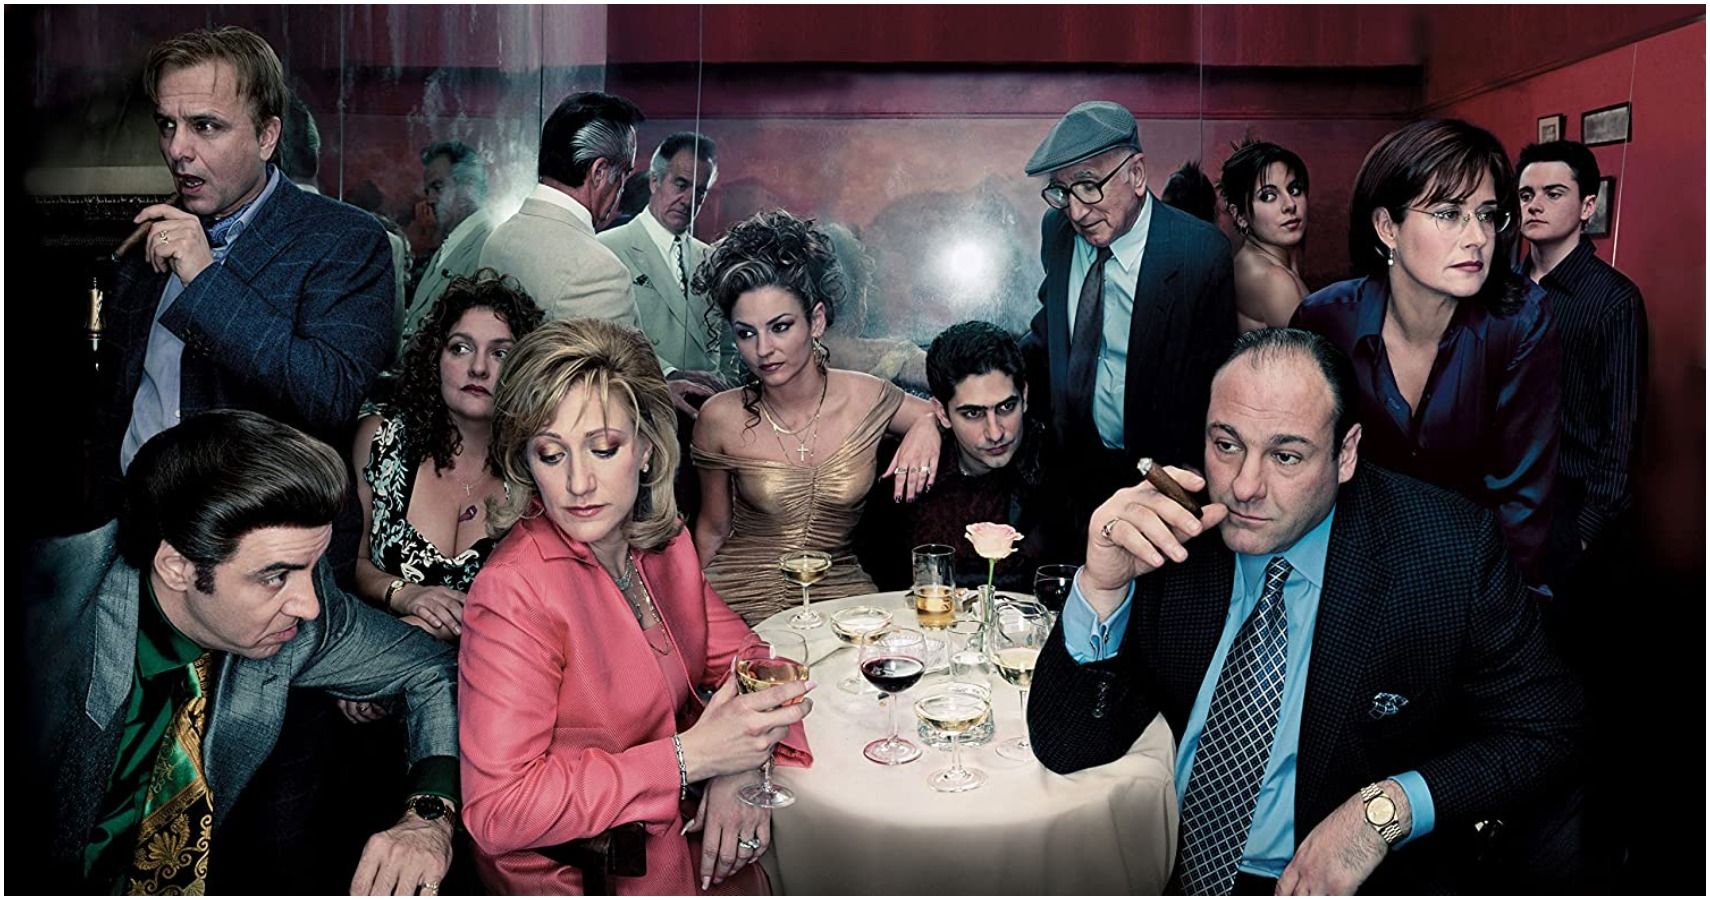 The Sopranos 10 Unpopular Opinions About The Show (According To Reddit)